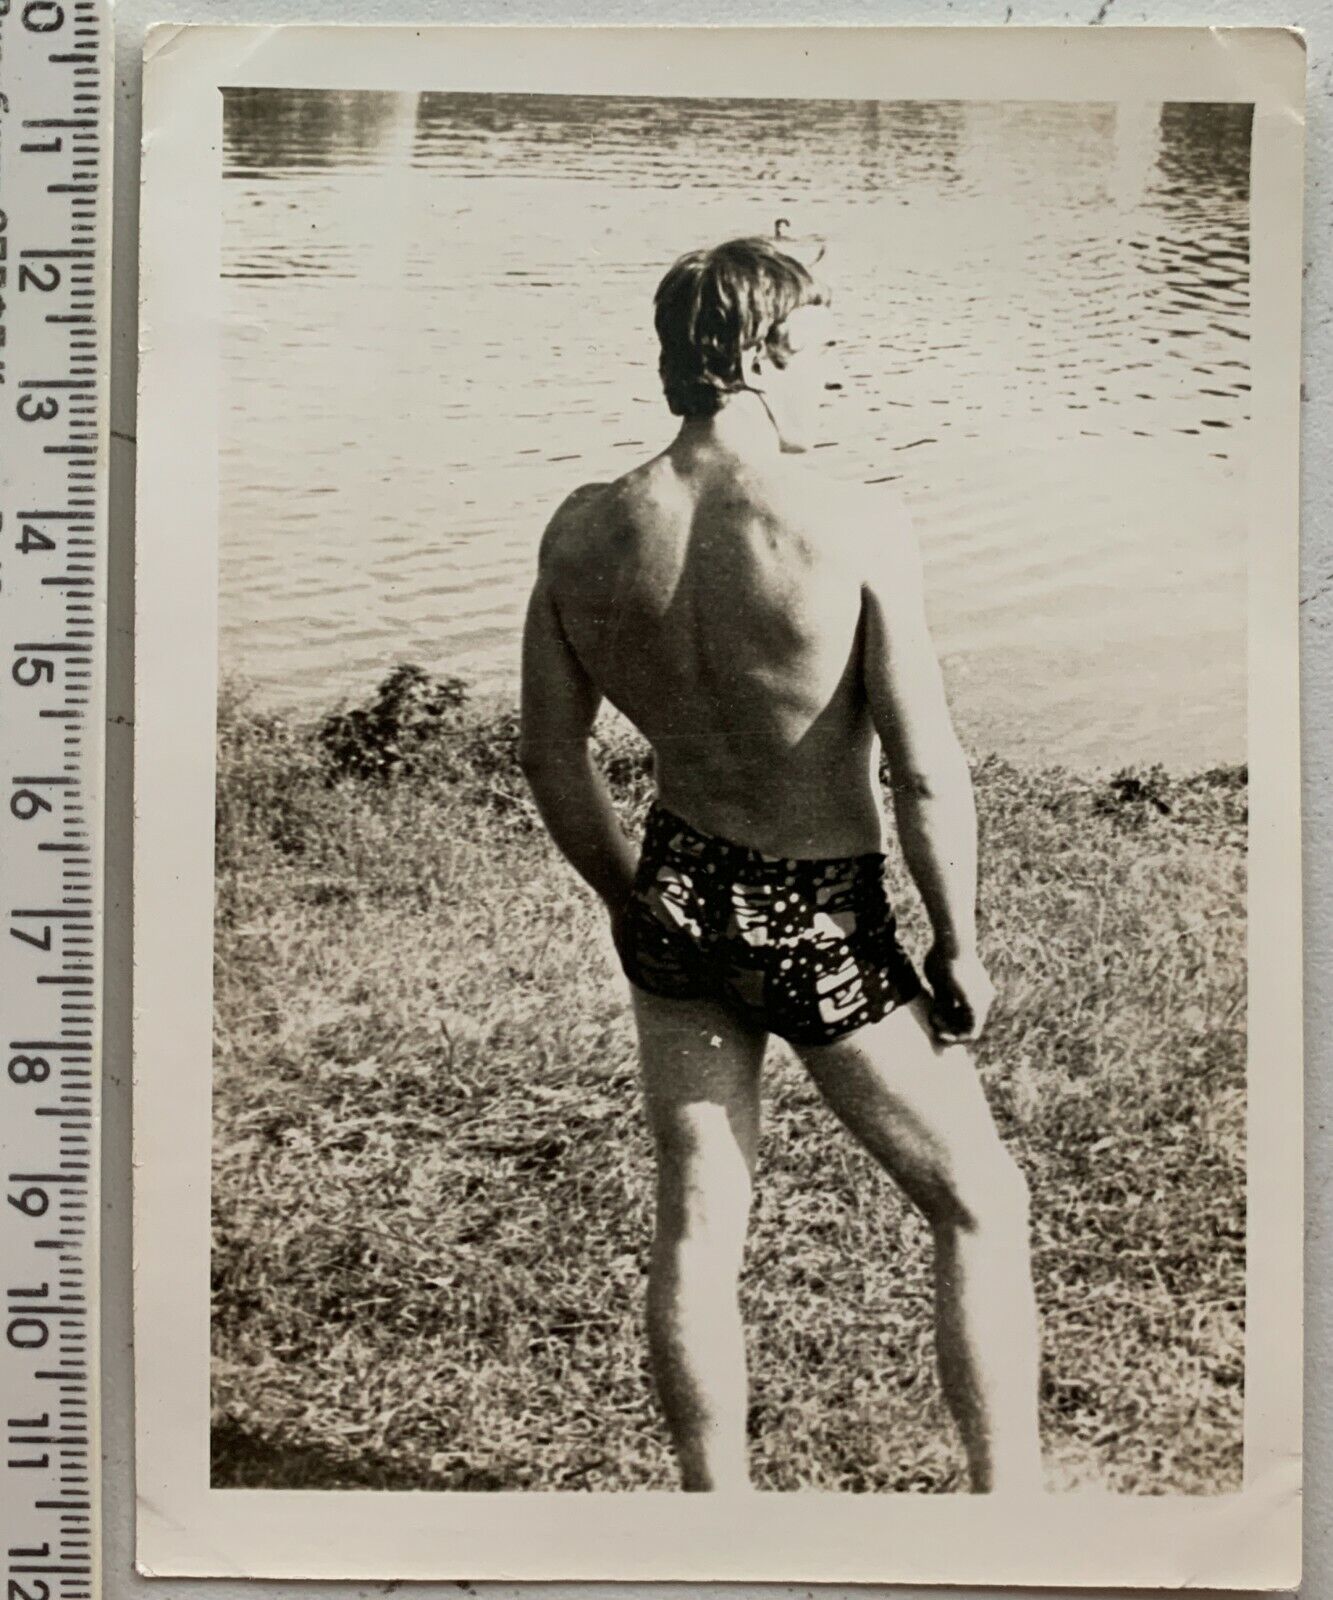 Shirtless Man Beefcake Physique Young Guy Affectionat Gay Interest Vintage Photo